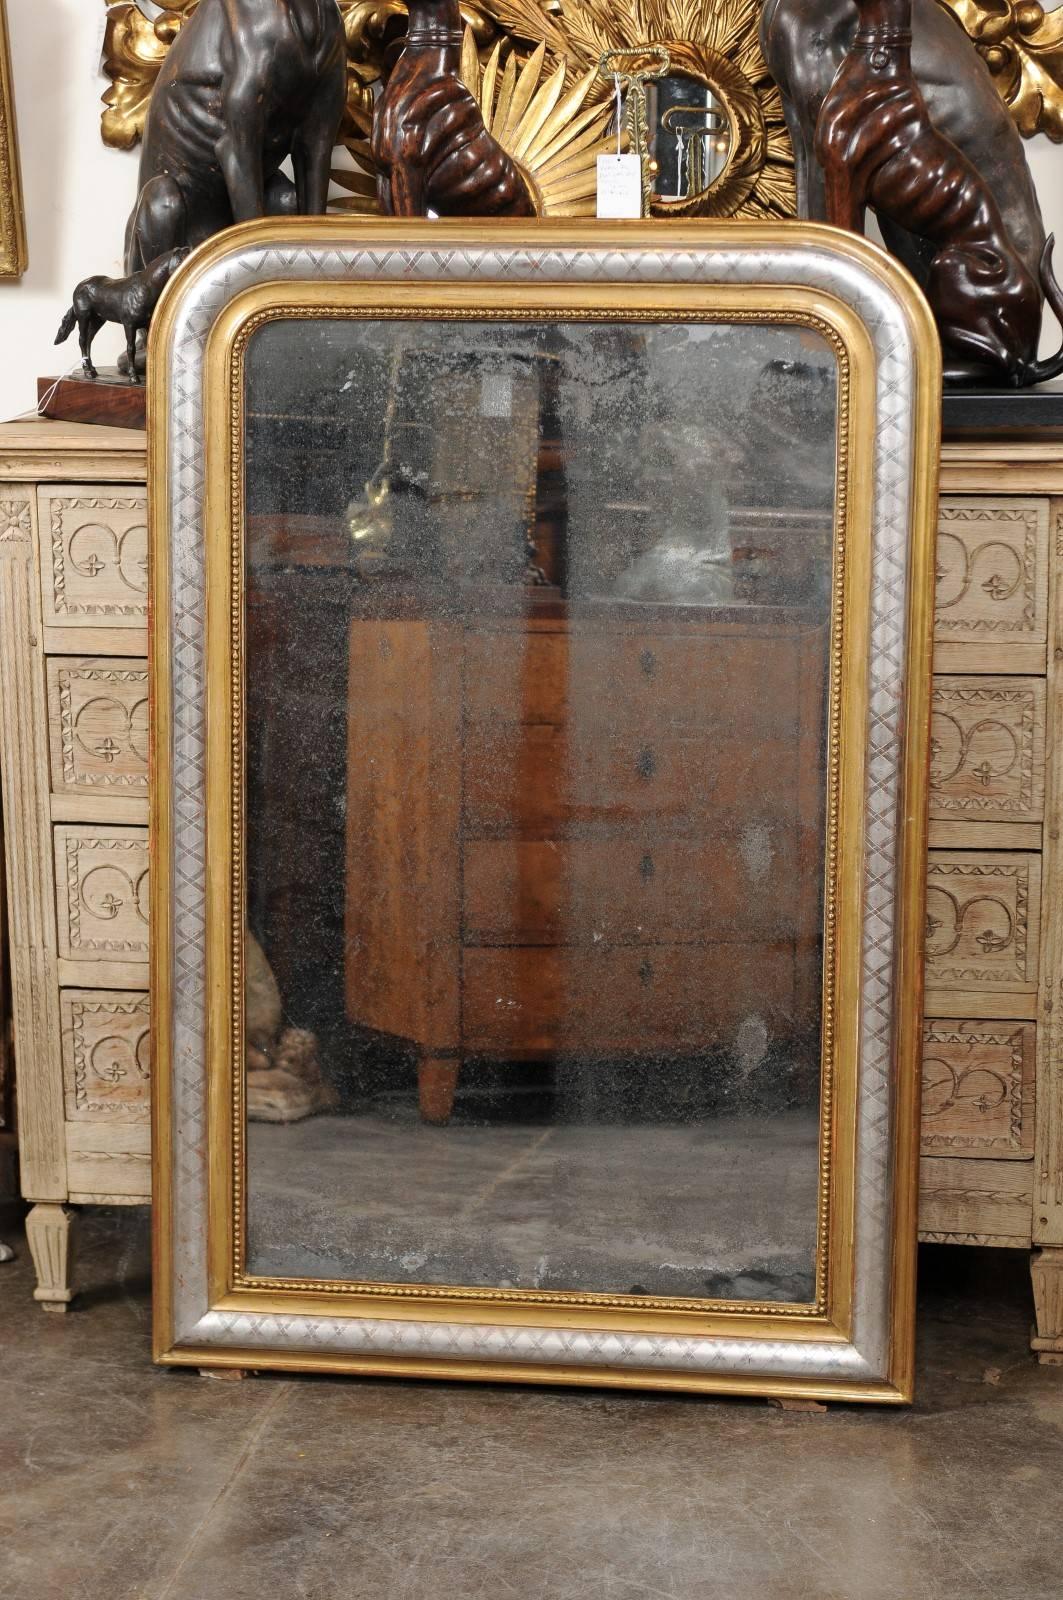 This French gold and silver Louis-Philippe mirror from the turn of the century features the typical rectangular shape with rounded corners at the top. The outer frame, made of a simply carved concave molding, is followed by a nicely contrasting